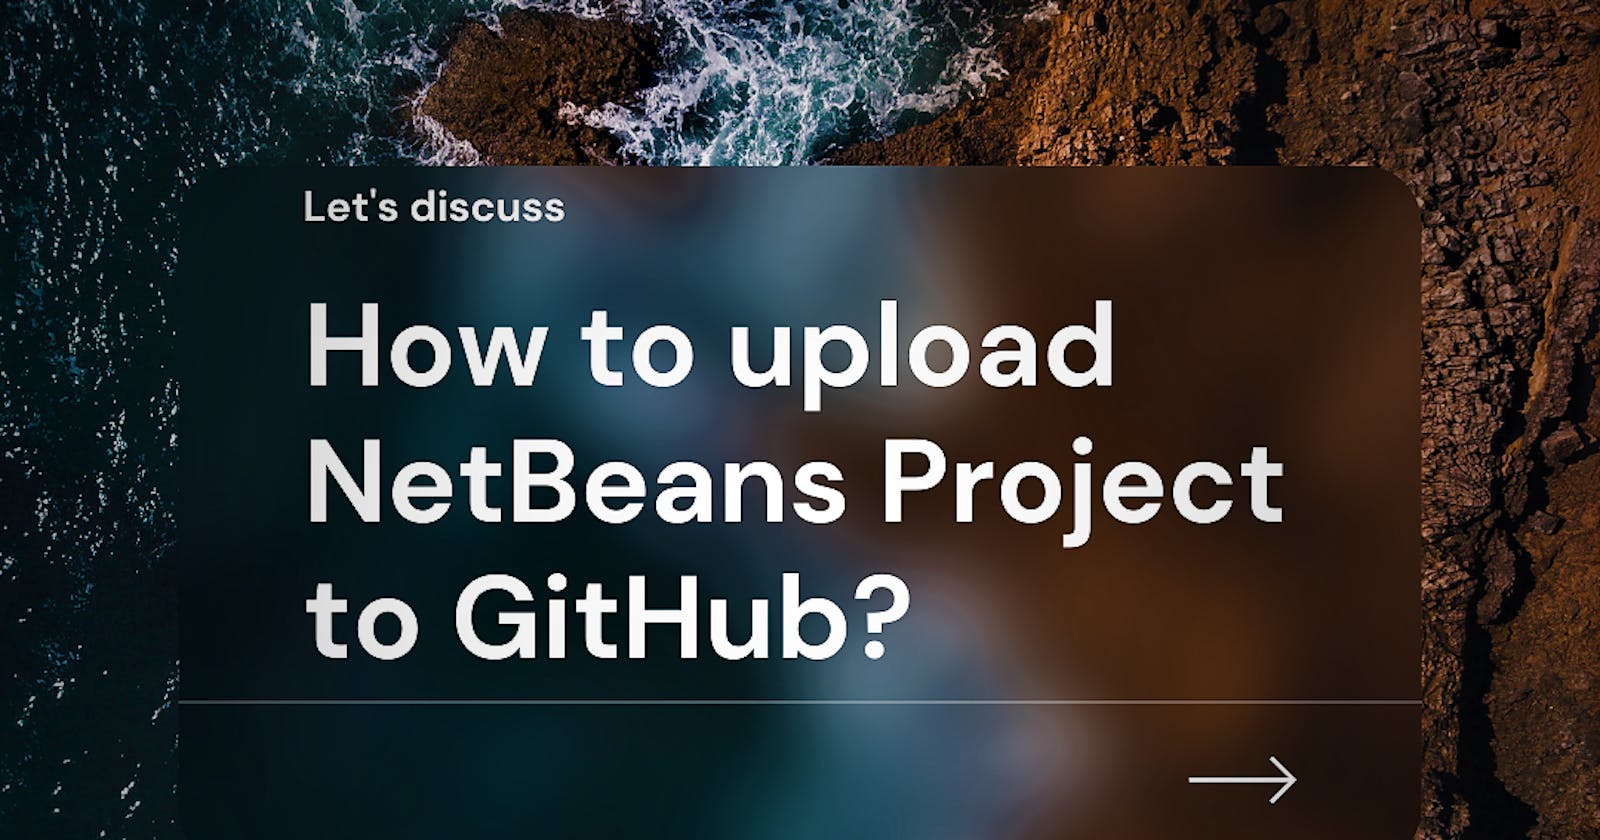 How to upload a NetBeans Project to GitHub.